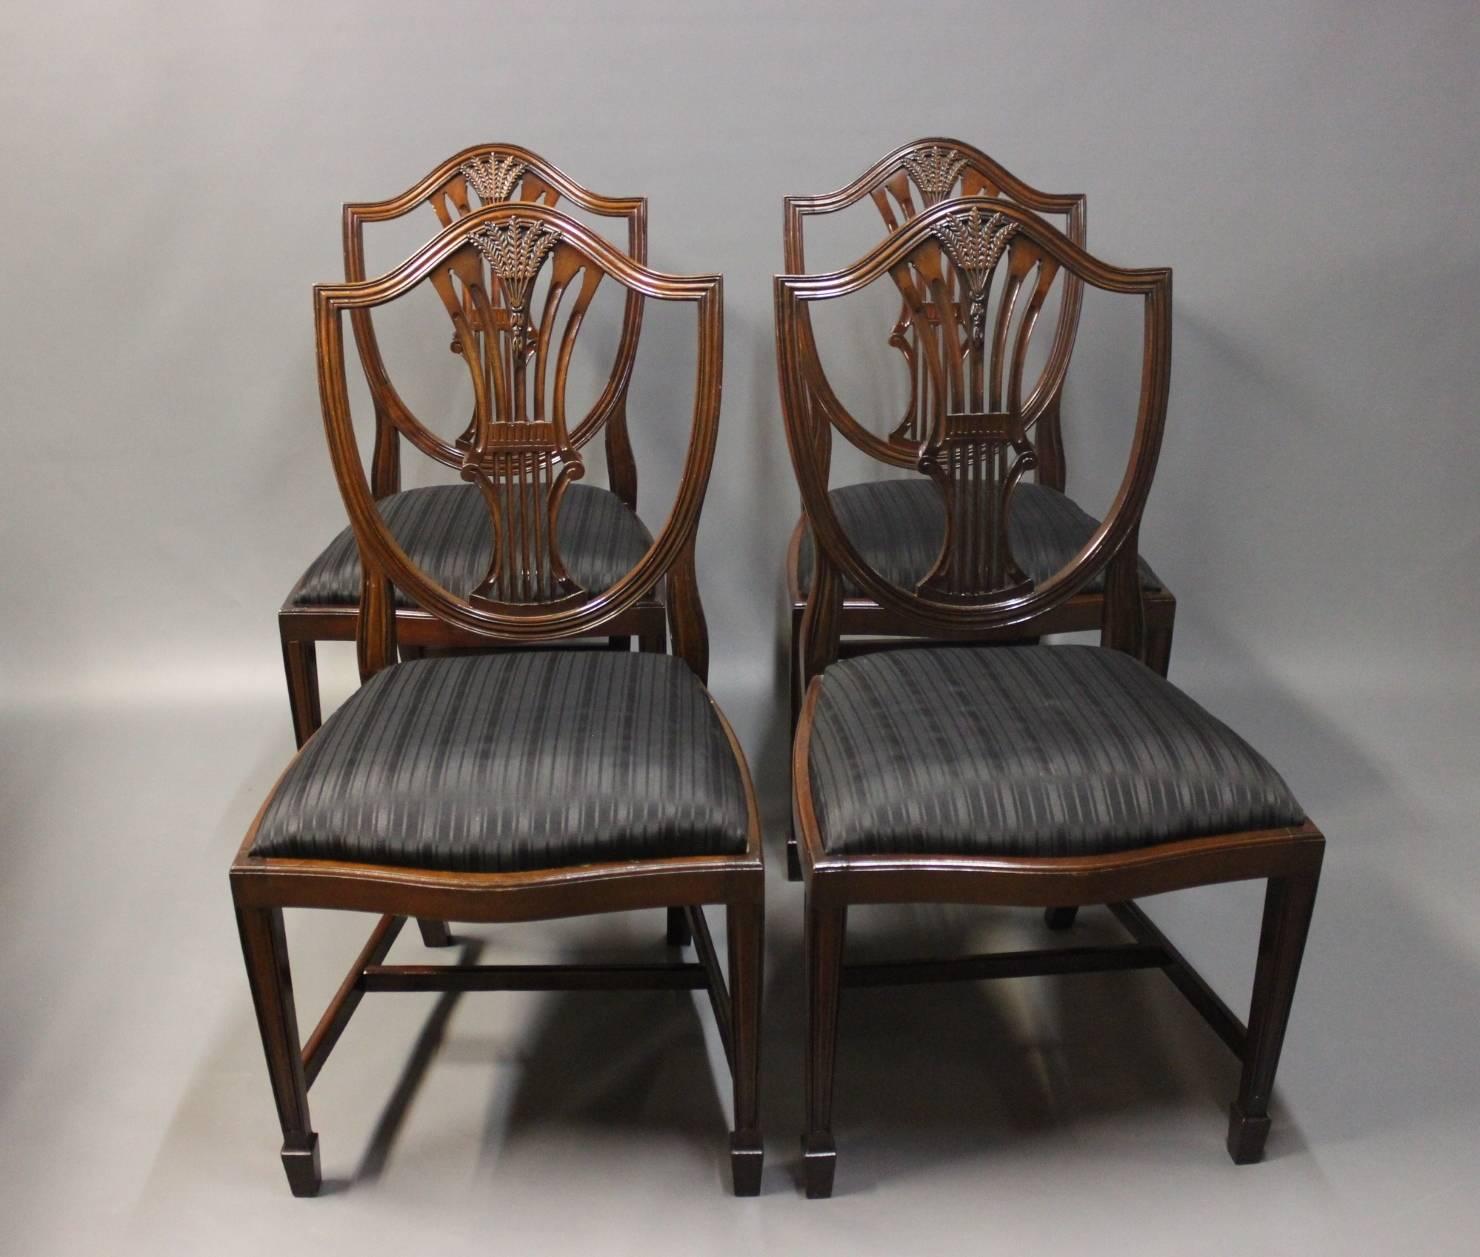 A set of four antique Hepplewhite dining room chairs by an unknown cabinetmaker from England and the 1920s. The chairs are in polished mahogany and upholstered in black fabric.